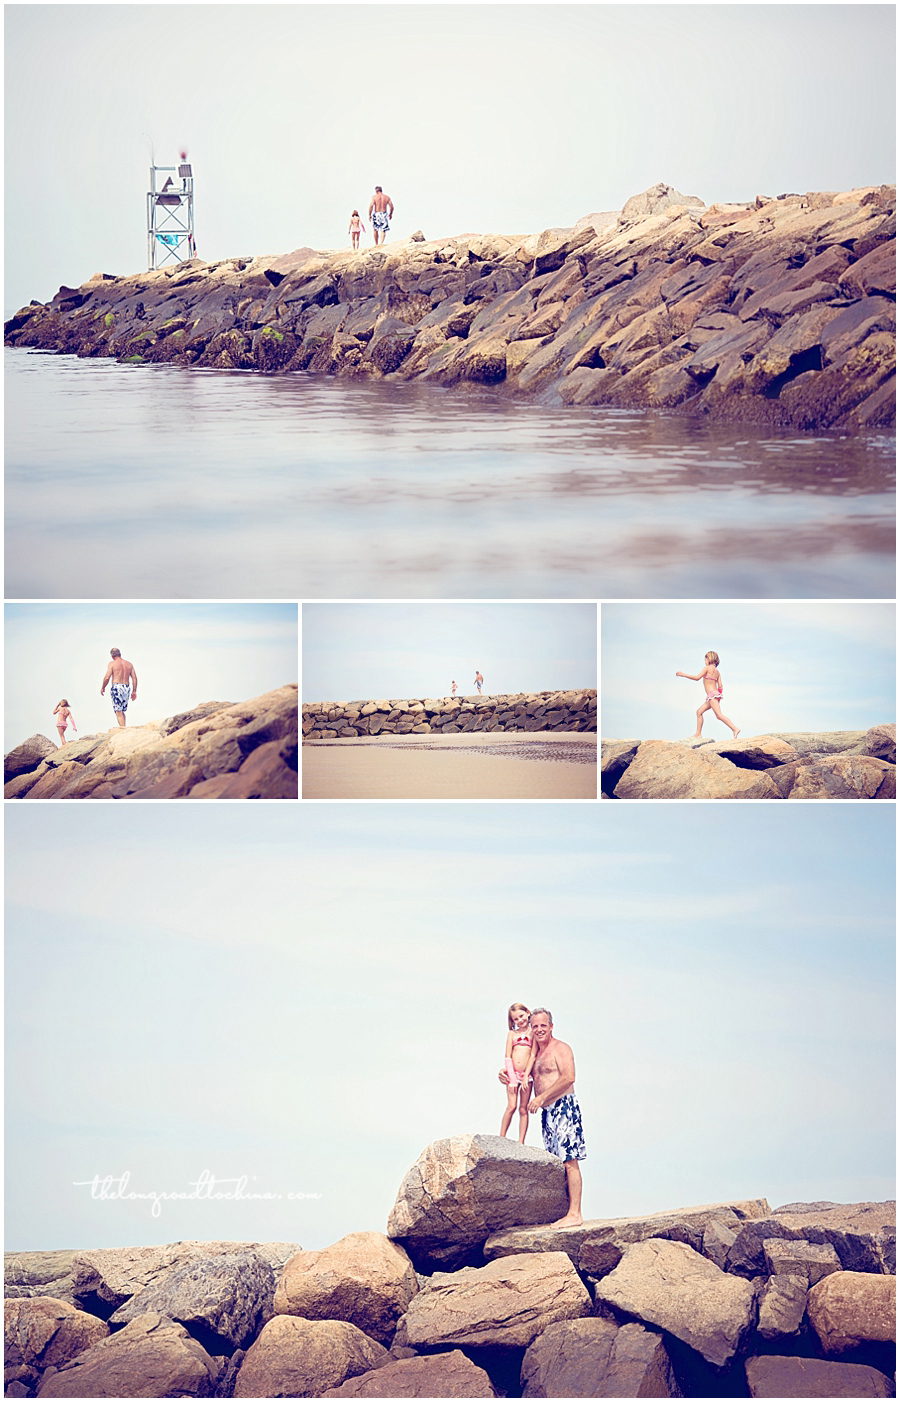 Hopping Rocks on the Jetty Collage 1